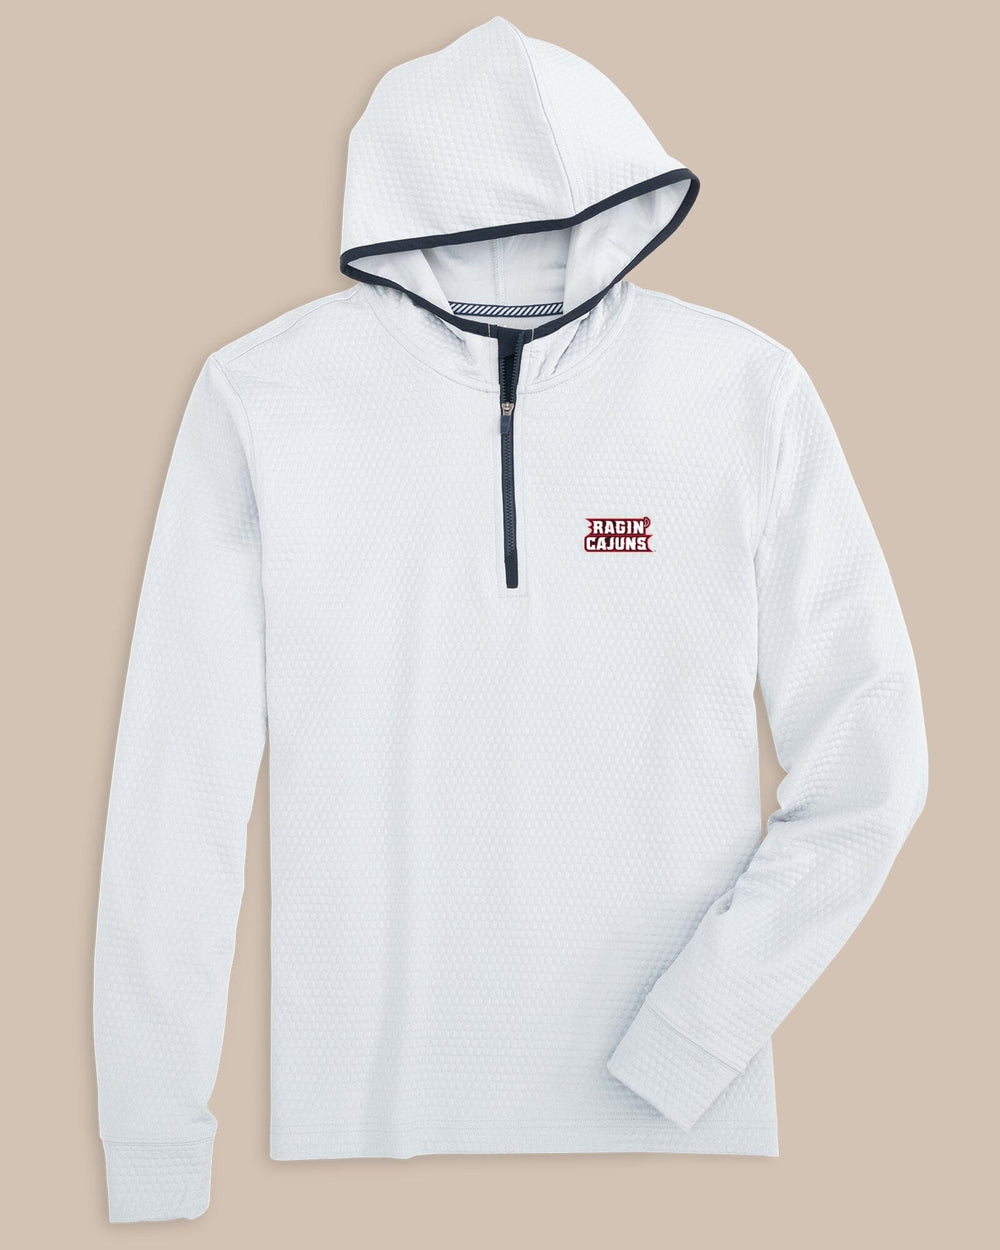 The front view of the University of Louisiana-Lafayette Scuttle Heather Quarter Zip Hoodie by Southern Tide - Heather Seagull Grey